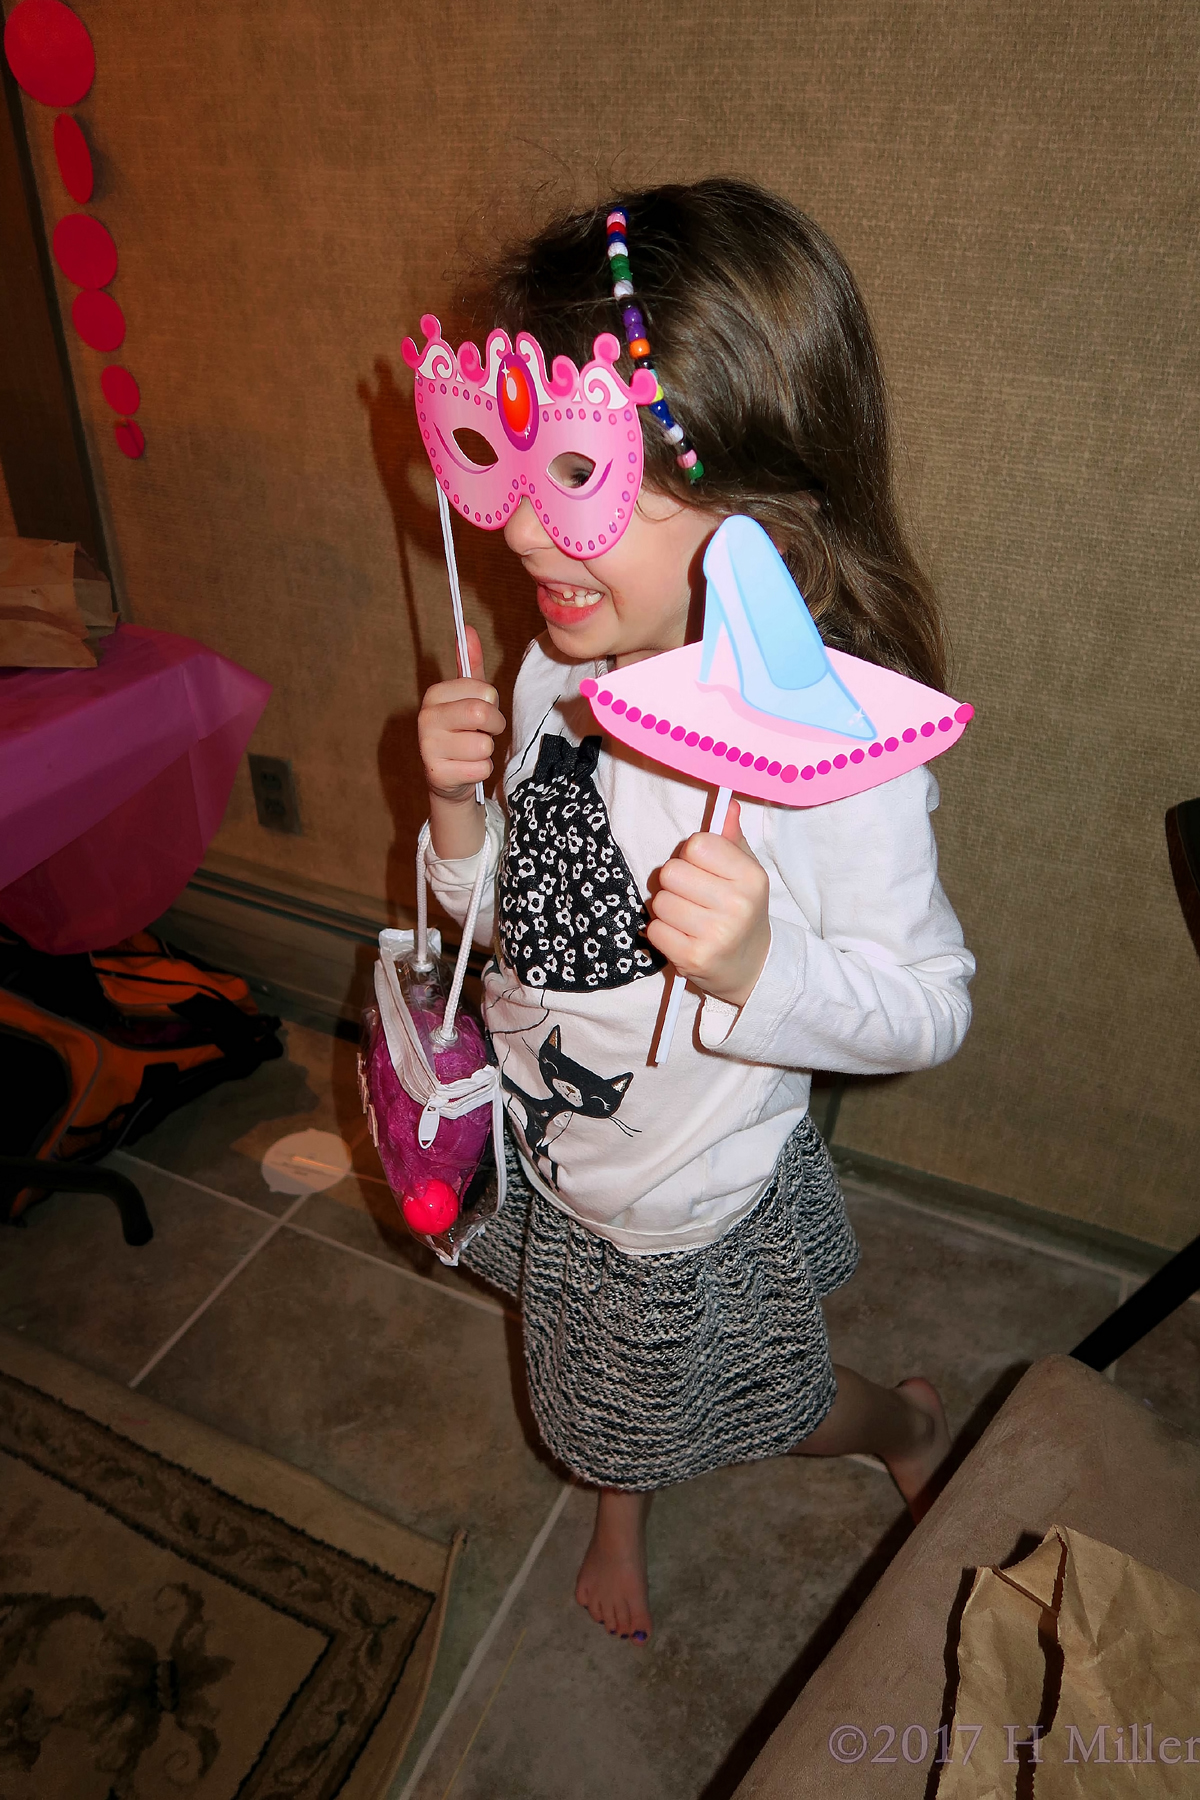 Posing For Selfies With Props At The Kids Party Selfie Station! Selfies Are So Much Fun!